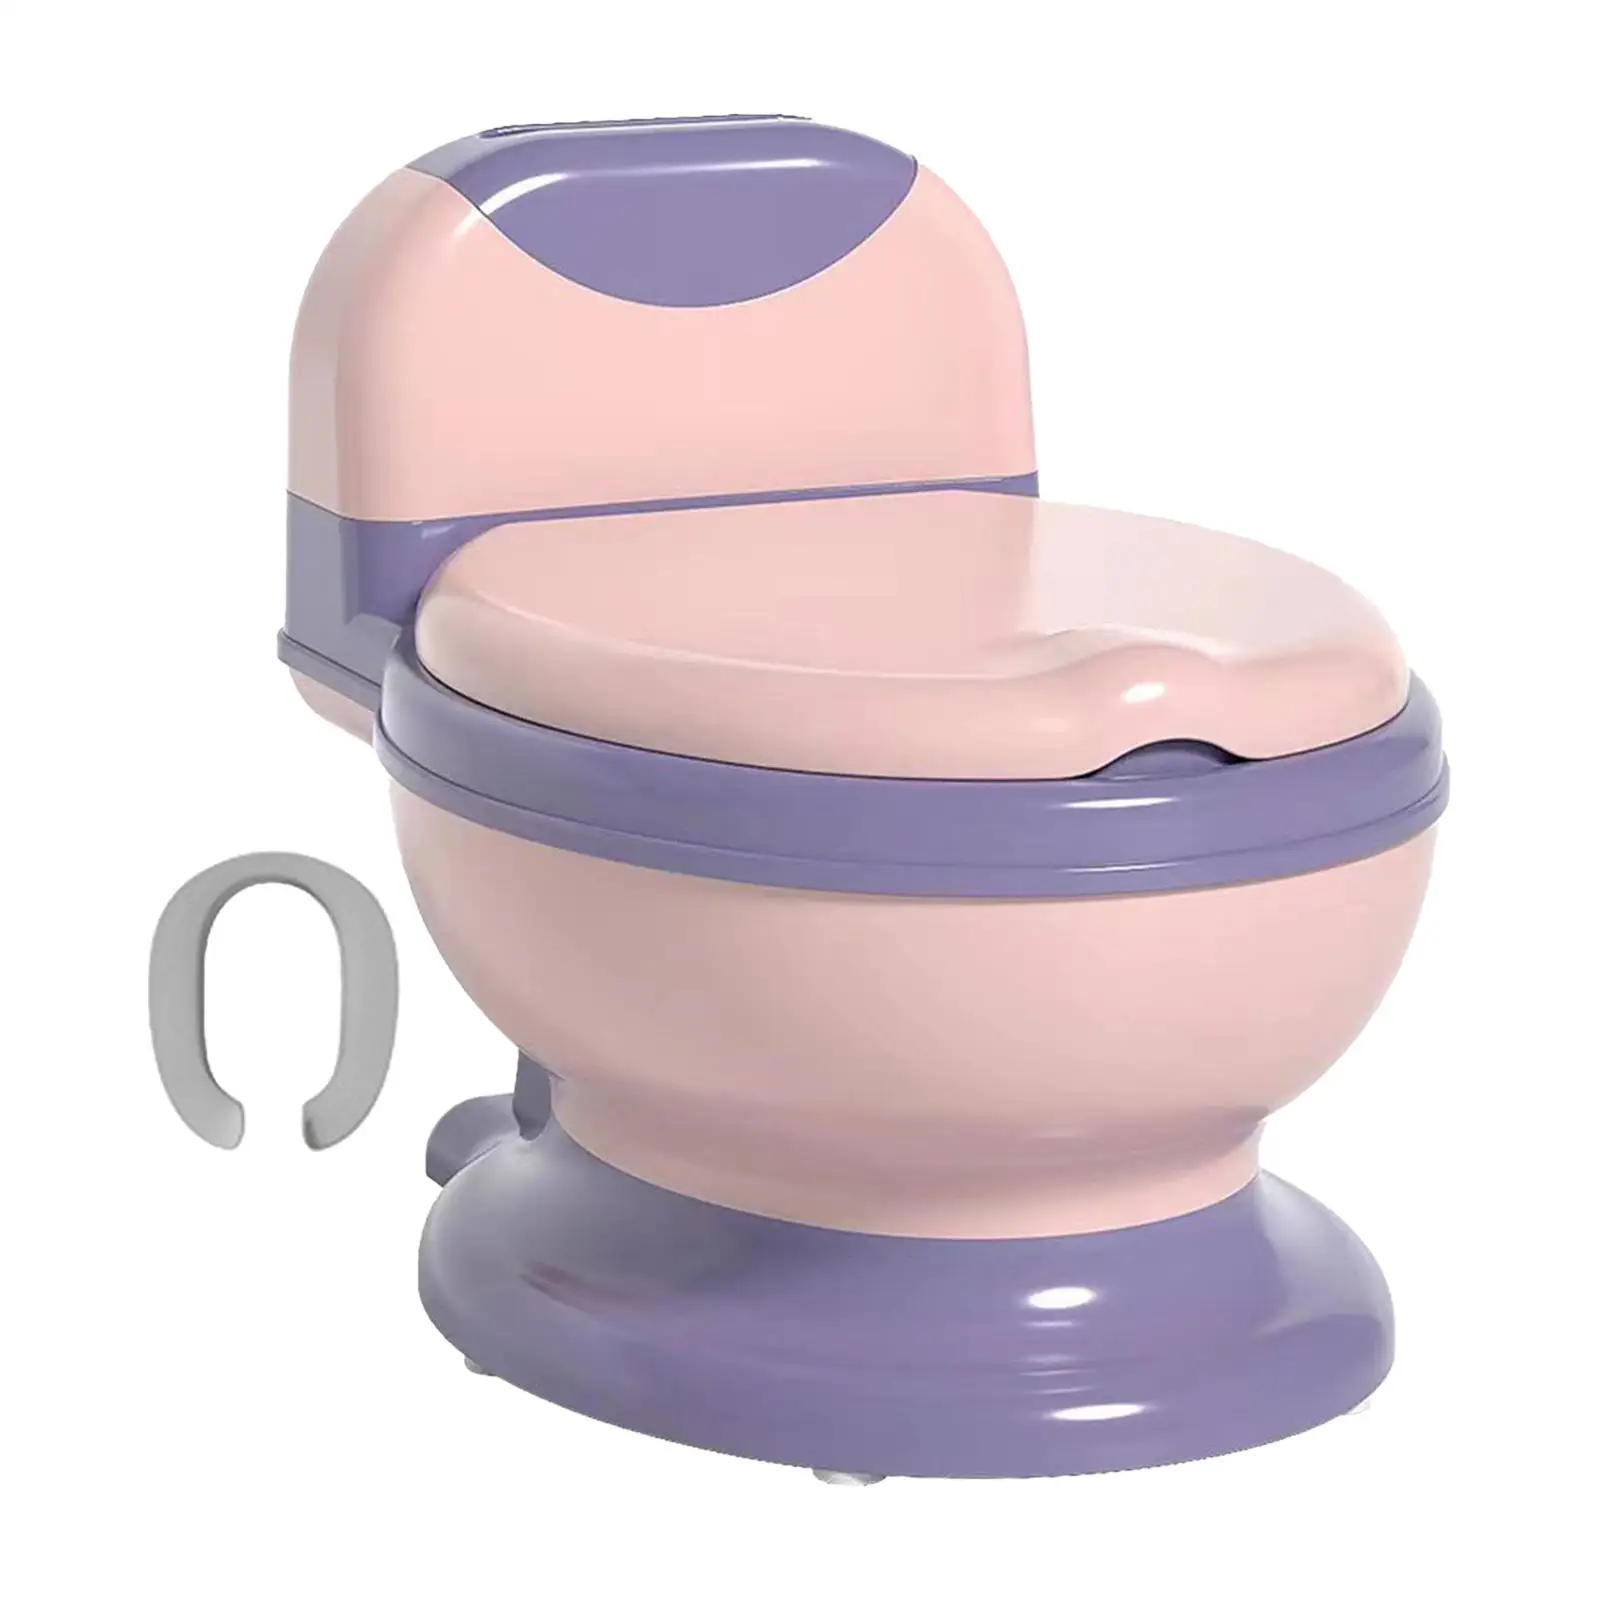 Potty Train Toilet Potty Train Seat Portable Removable Potty Pot Real Feel Potty for Baby Boys Children Toddlers Girls